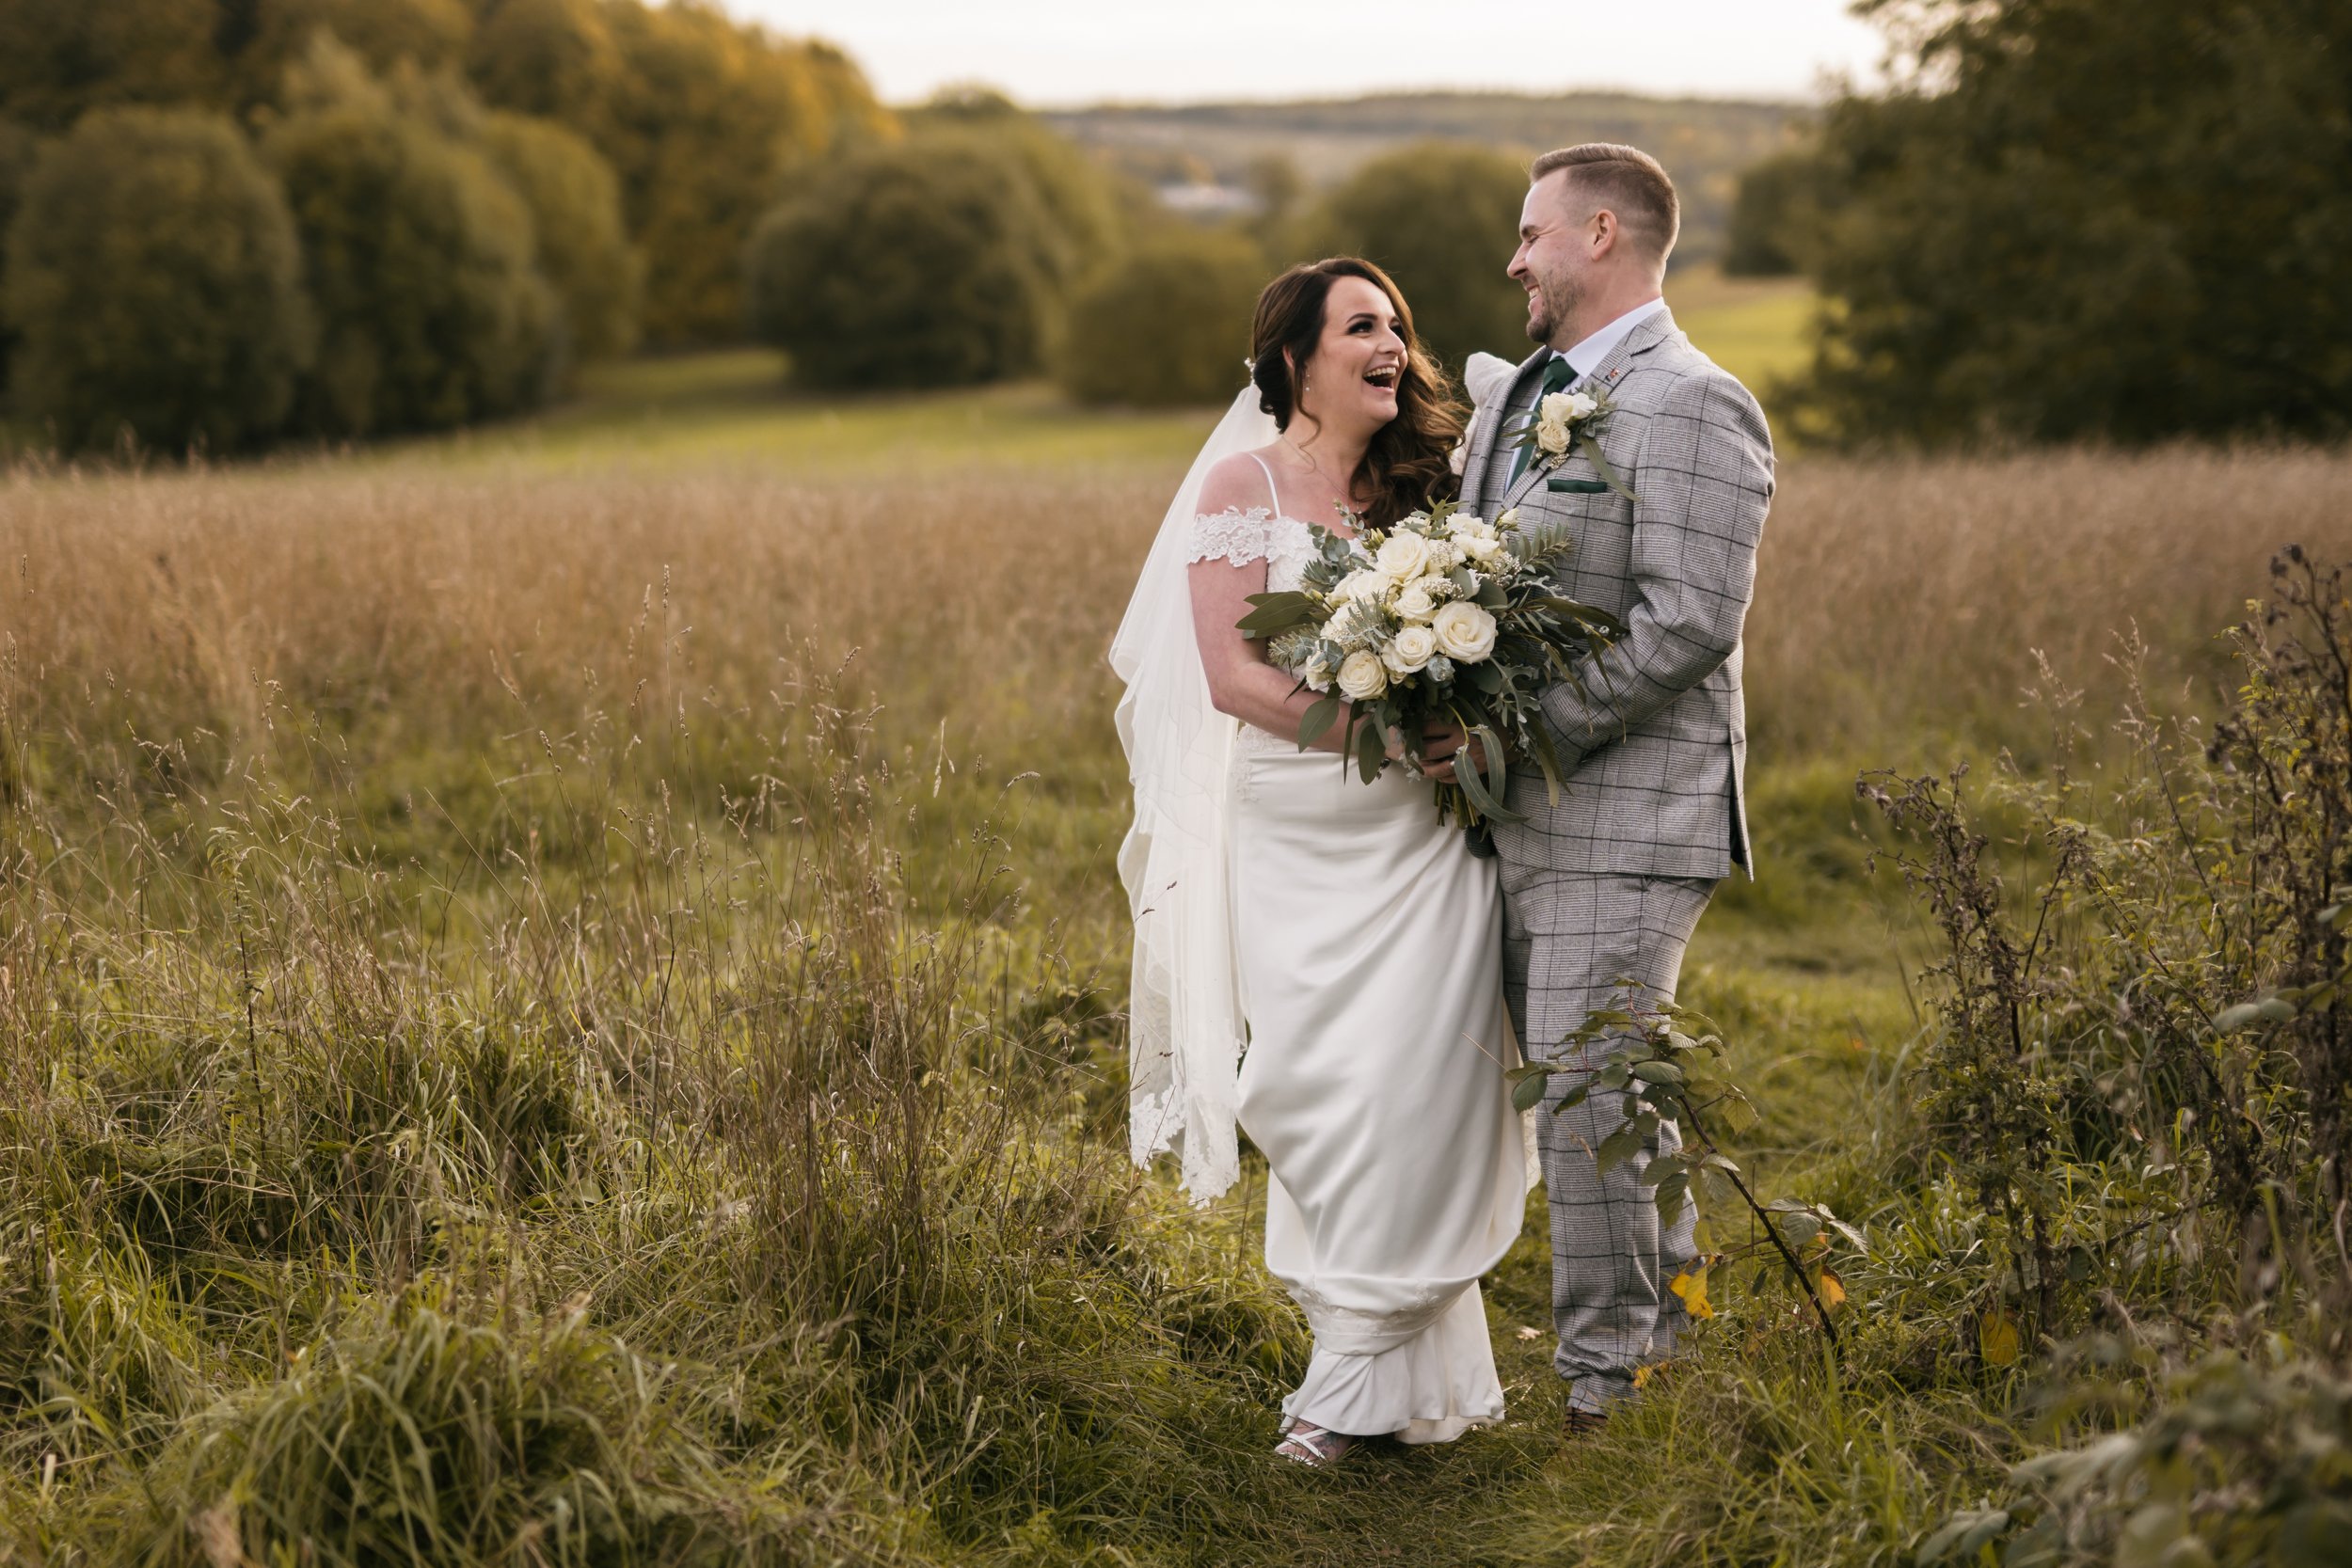  In a field of long grass the wedding photographer has captured this natural image of the bride and groom sharing a special moment of laughter. The couple are walking closely next to each other both with a hand holding the bridal bouquet, whilst look